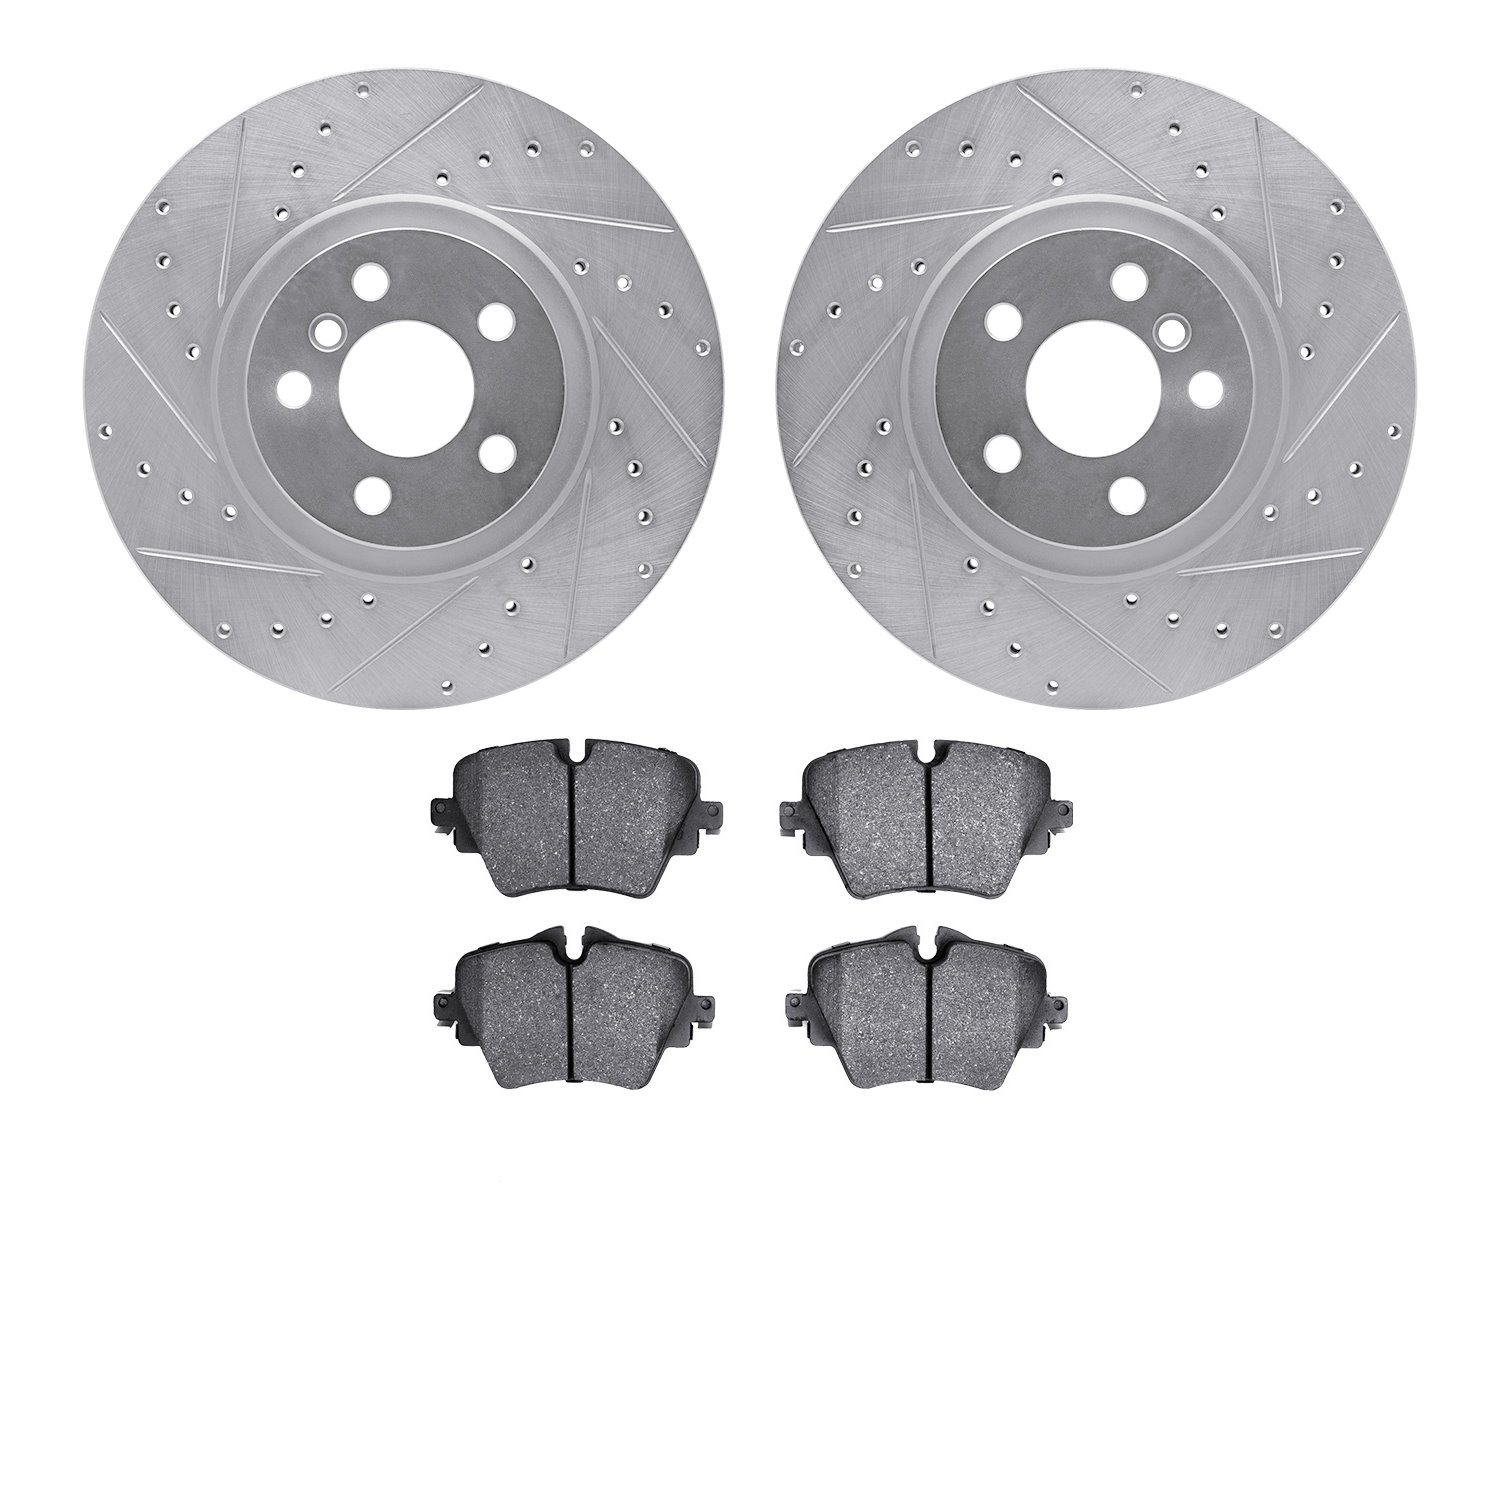 7602-31115 Drilled/Slotted Brake Rotors w/5000 Euro Ceramic Brake Pads Kit [Silver], Fits Select Multiple Makes/Models, Position